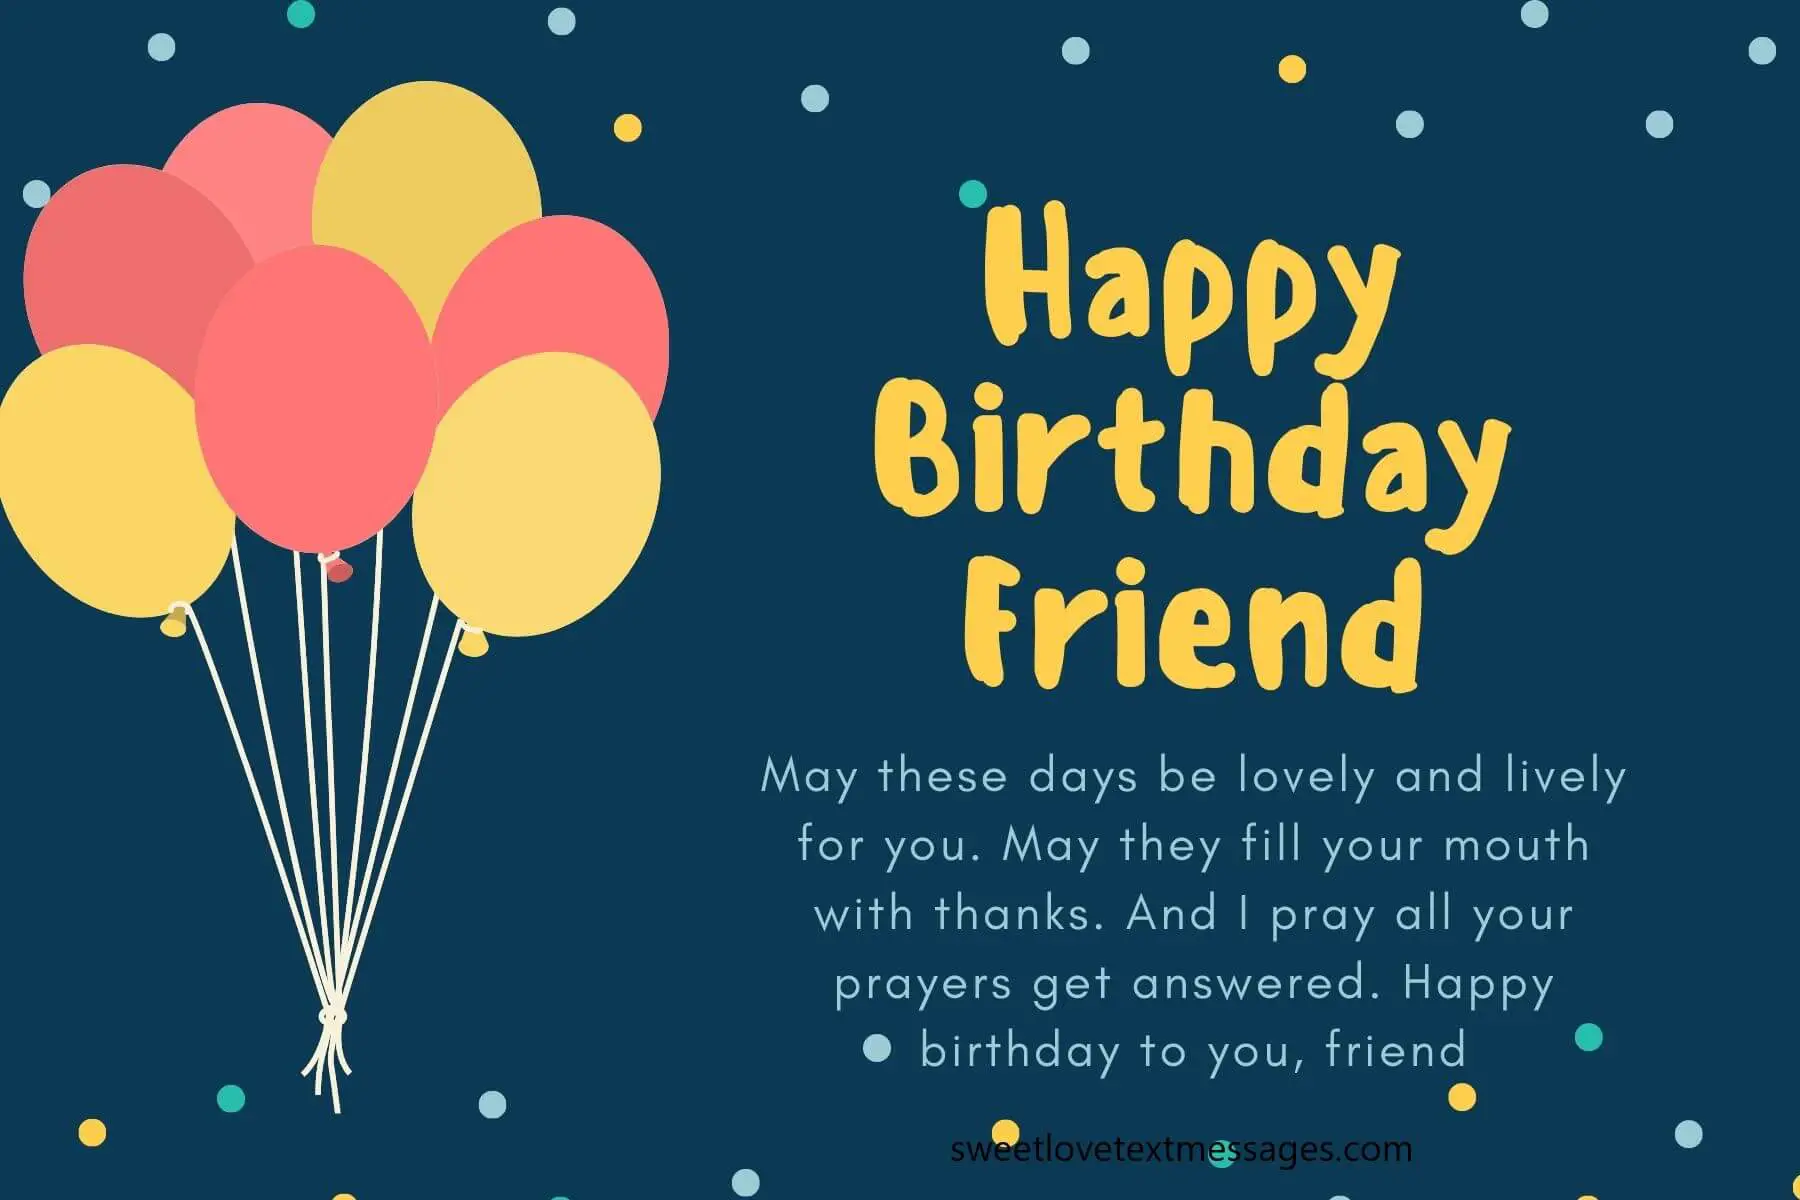 birthday-greetings-for-a-male-friend-bitrhday-gallery